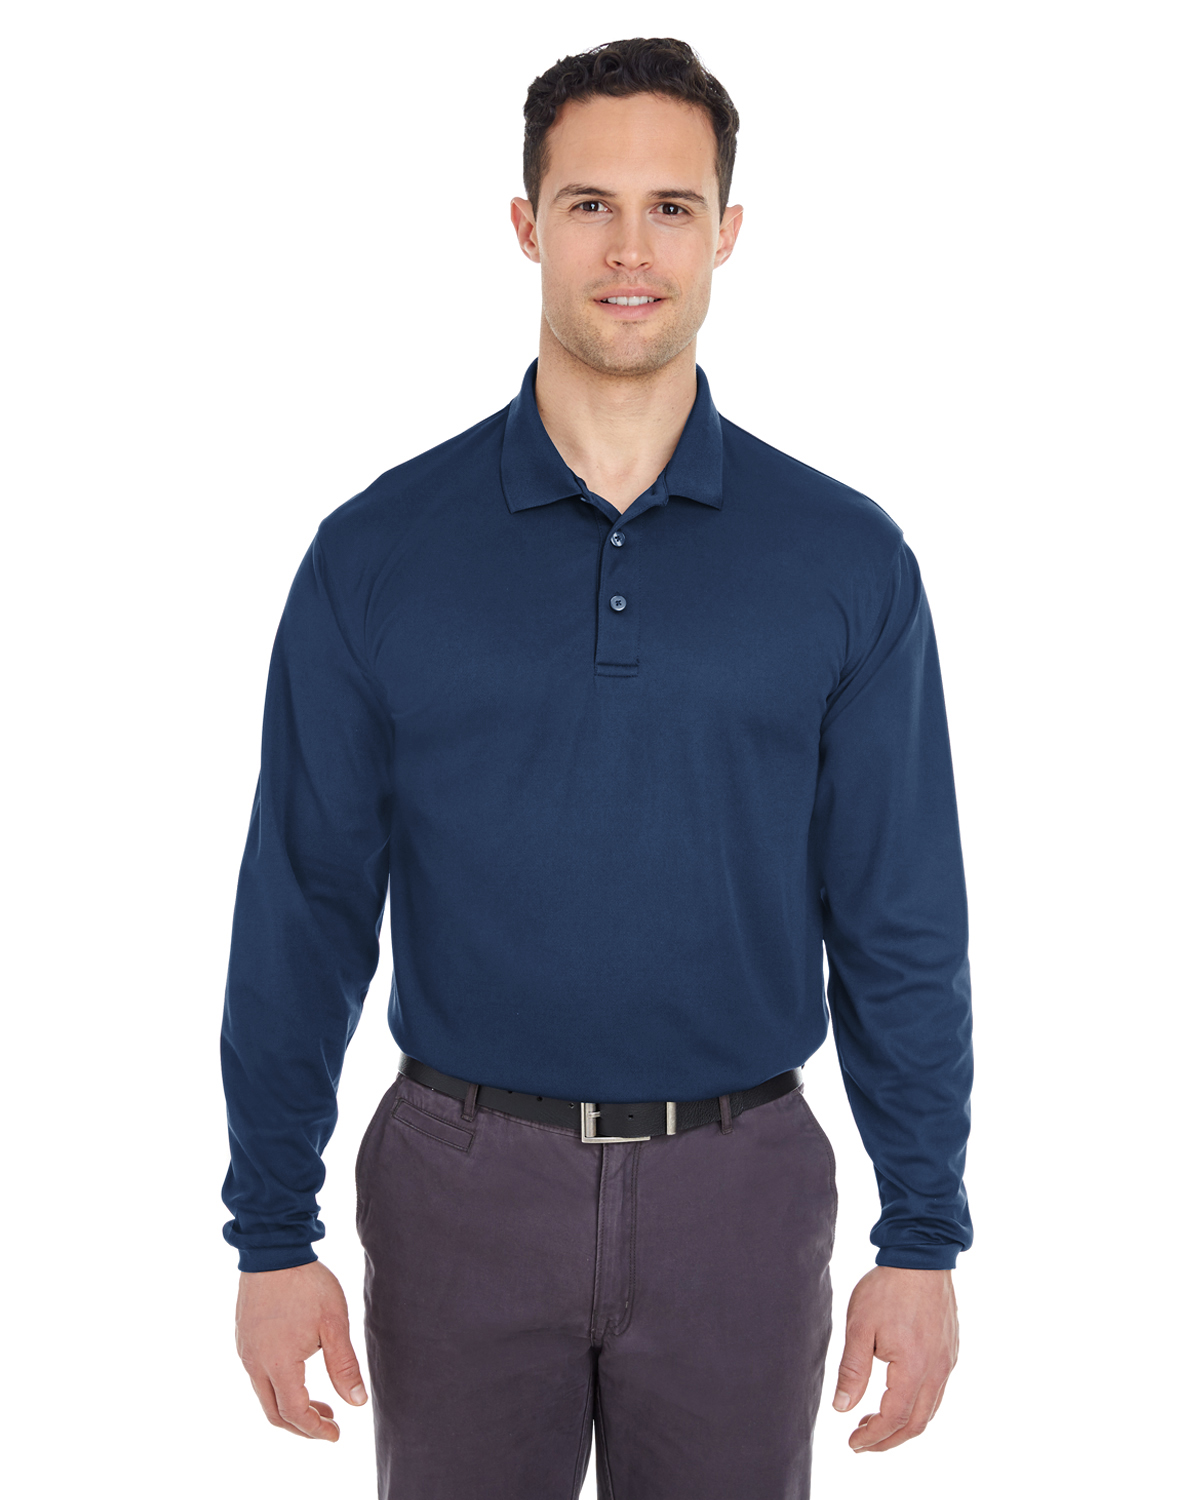 Ultra Club 8210LS - Adult Cool & Dry Long-Sleeve Mesh Pique Polo